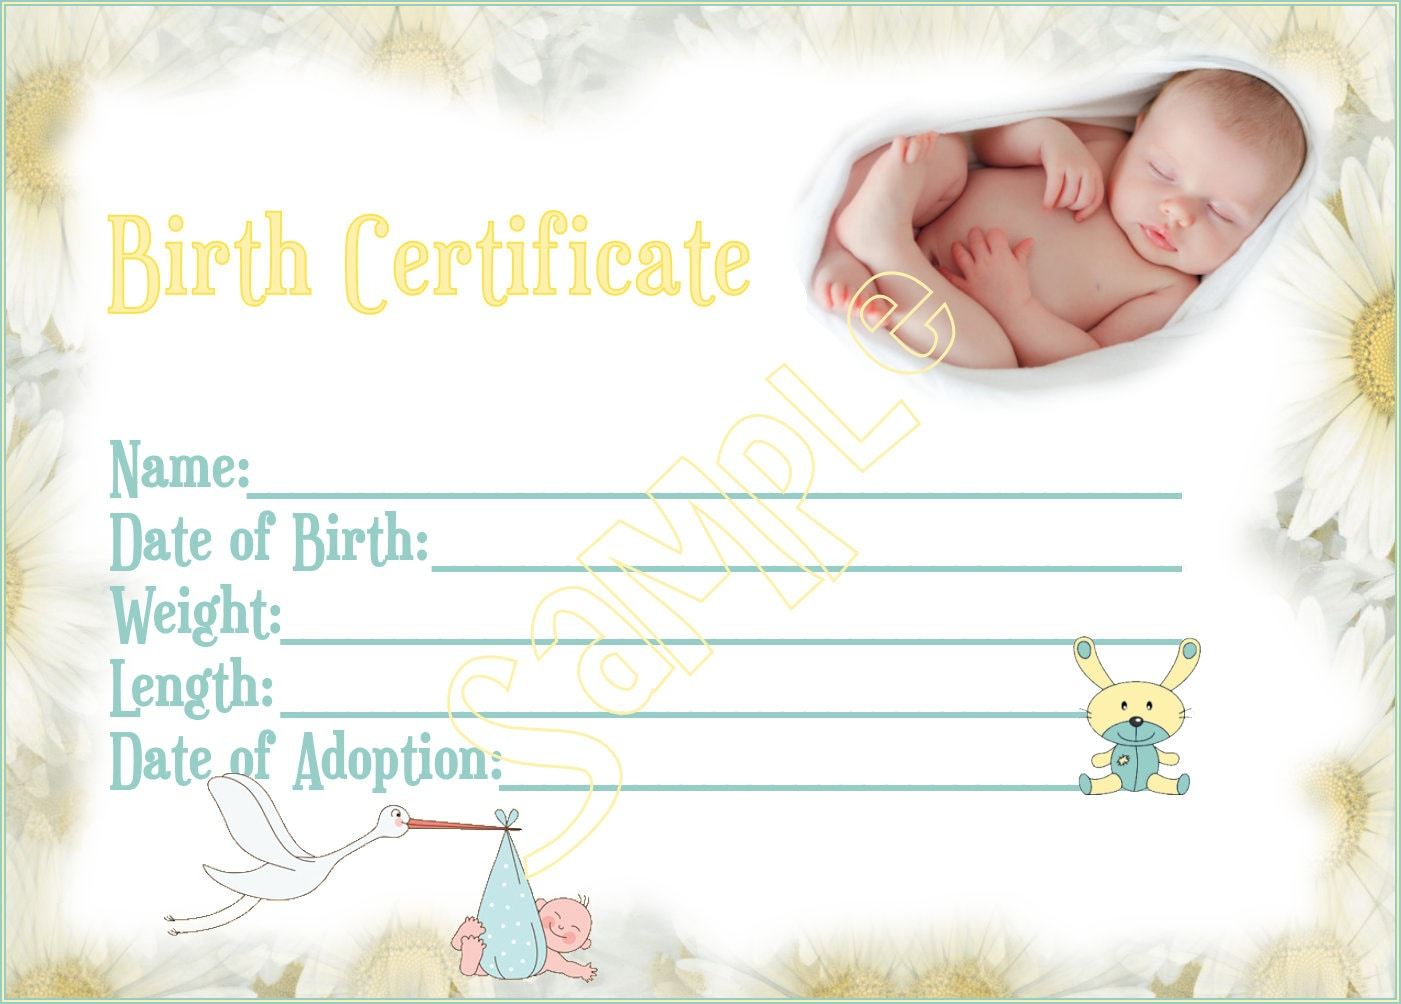 NEW ARRIVAL Reborn Baby Doll Birth Certificate Instant Download You Print  PNG Jpeg And Pdf Files For 10×10 Graphic Throughout Baby Doll Birth Certificate Template